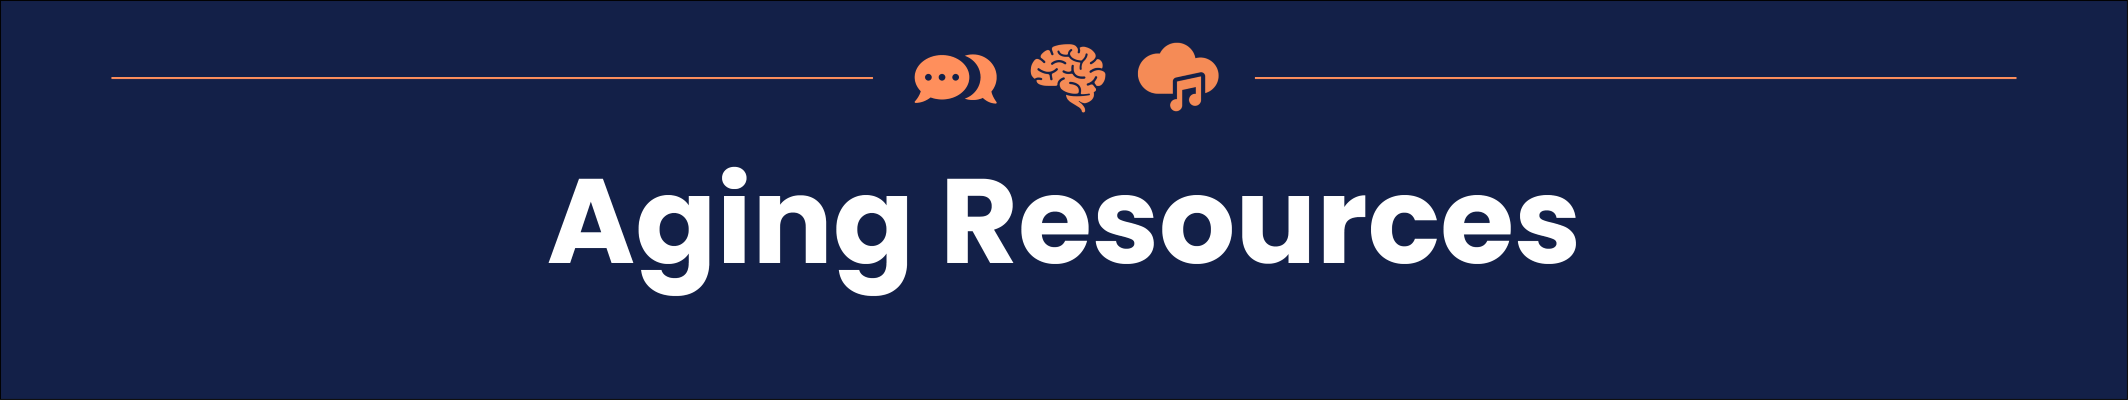 Aging Resources Banner